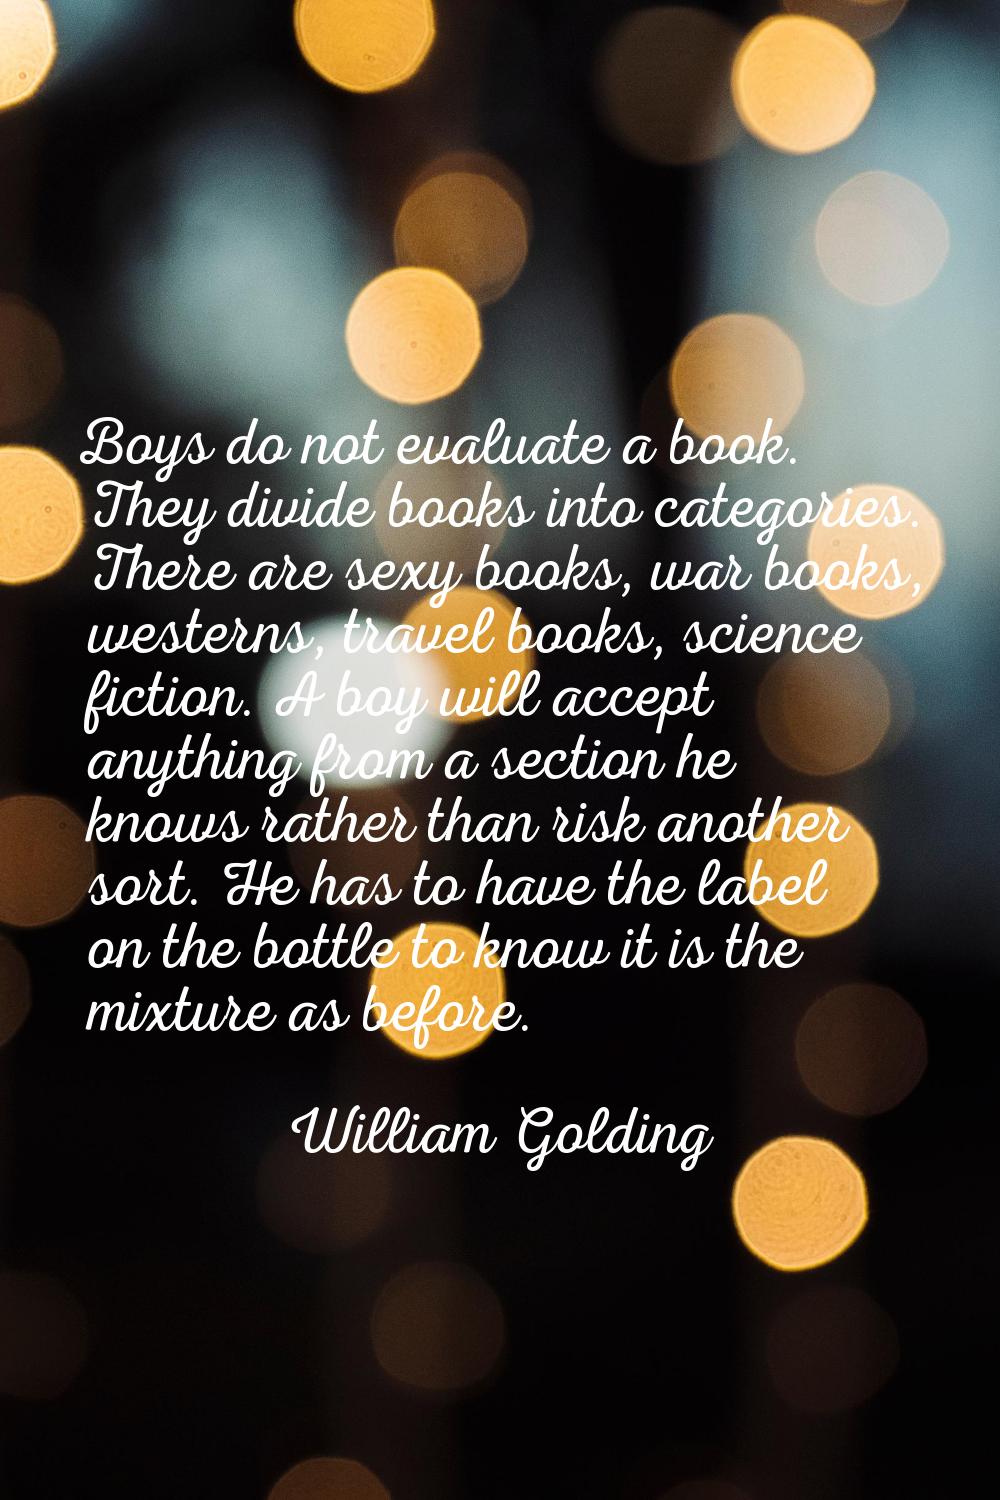 Boys do not evaluate a book. They divide books into categories. There are sexy books, war books, we